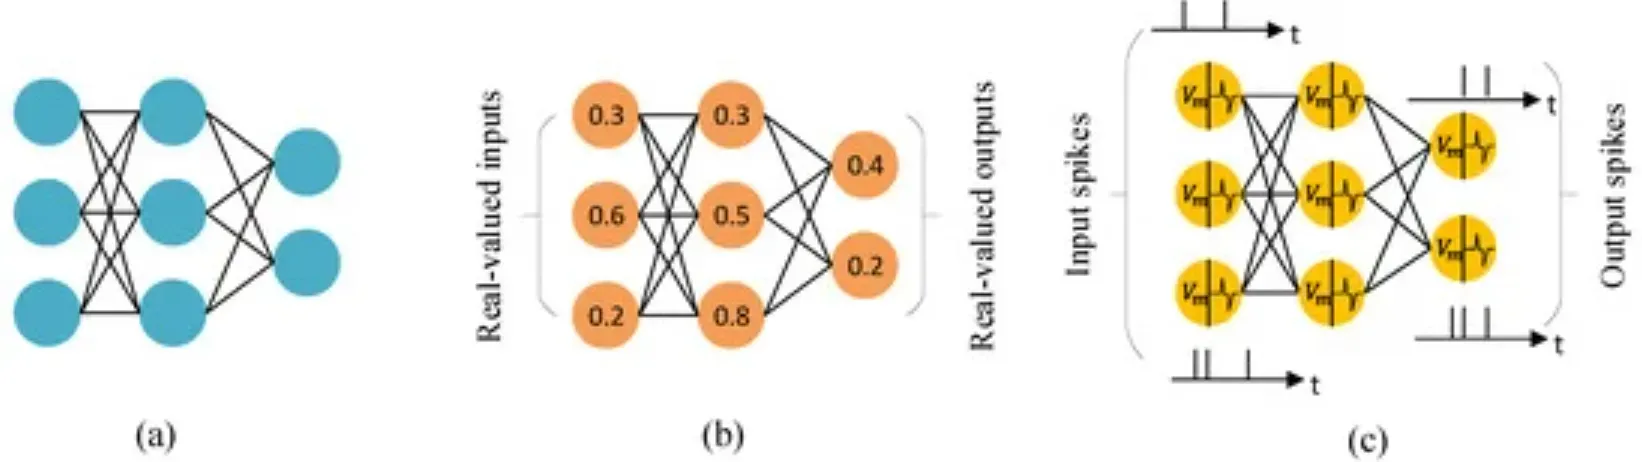 Ideal Implementation Scenarios for Spiking Neural Networks